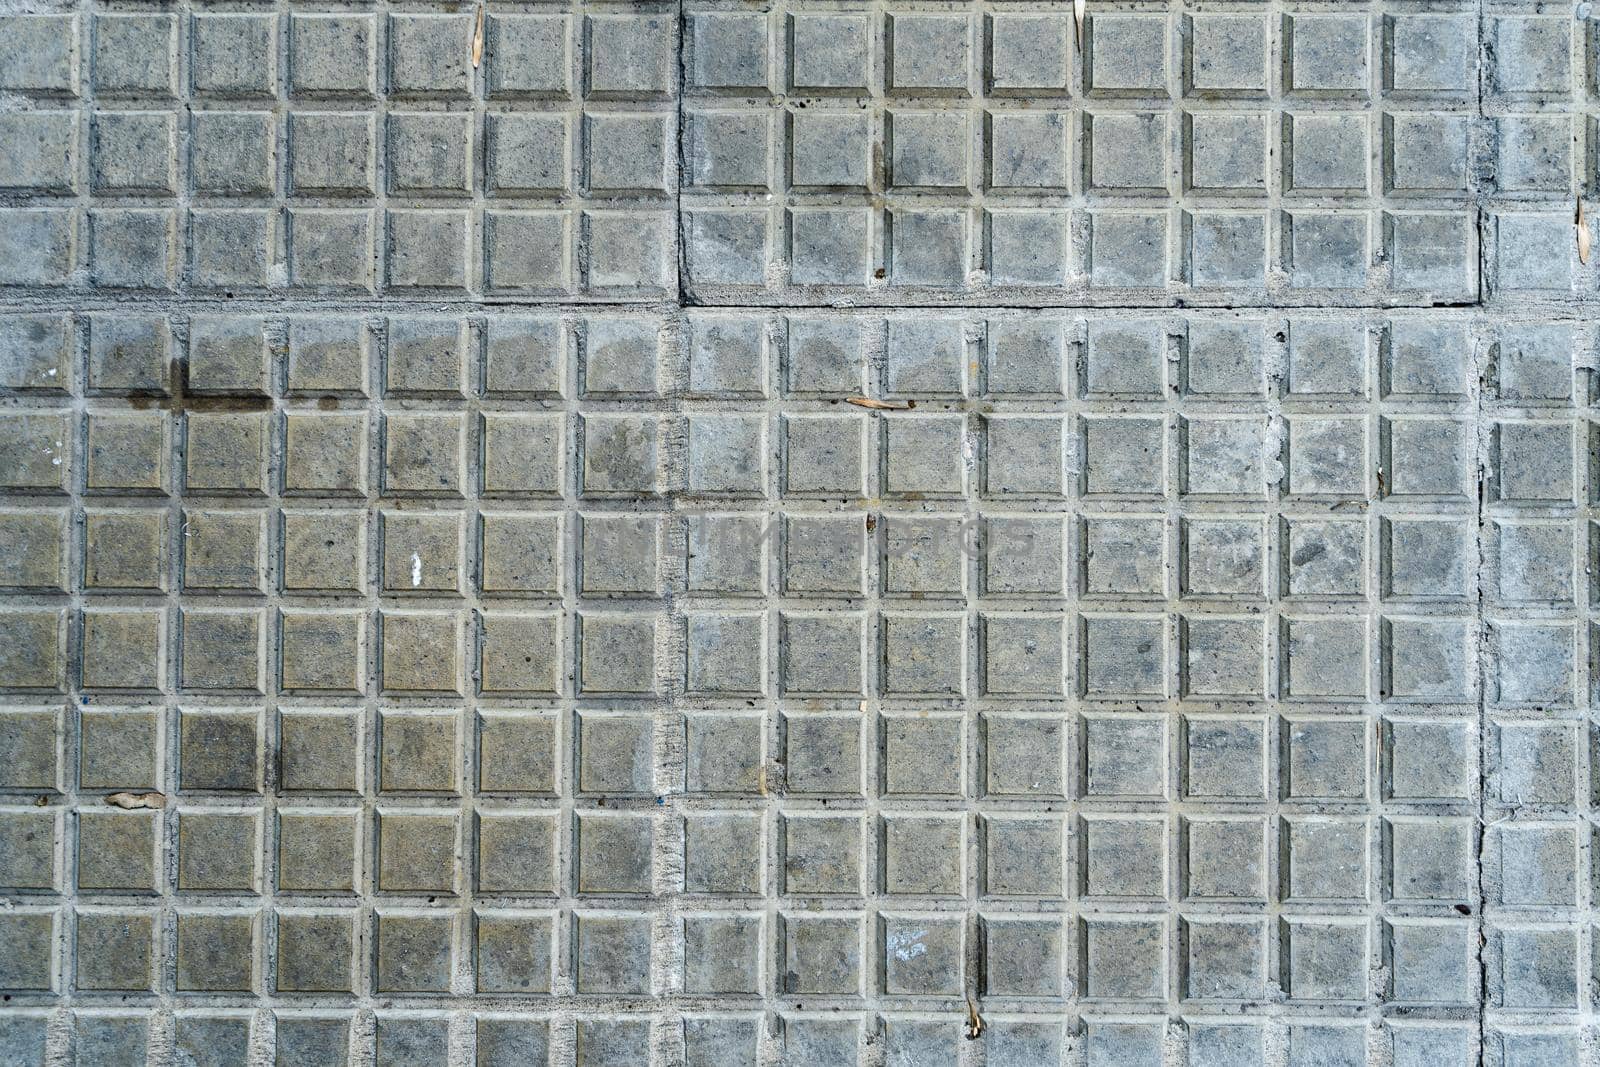 Background of square tiles or slabs on a wall. by hdcaputo